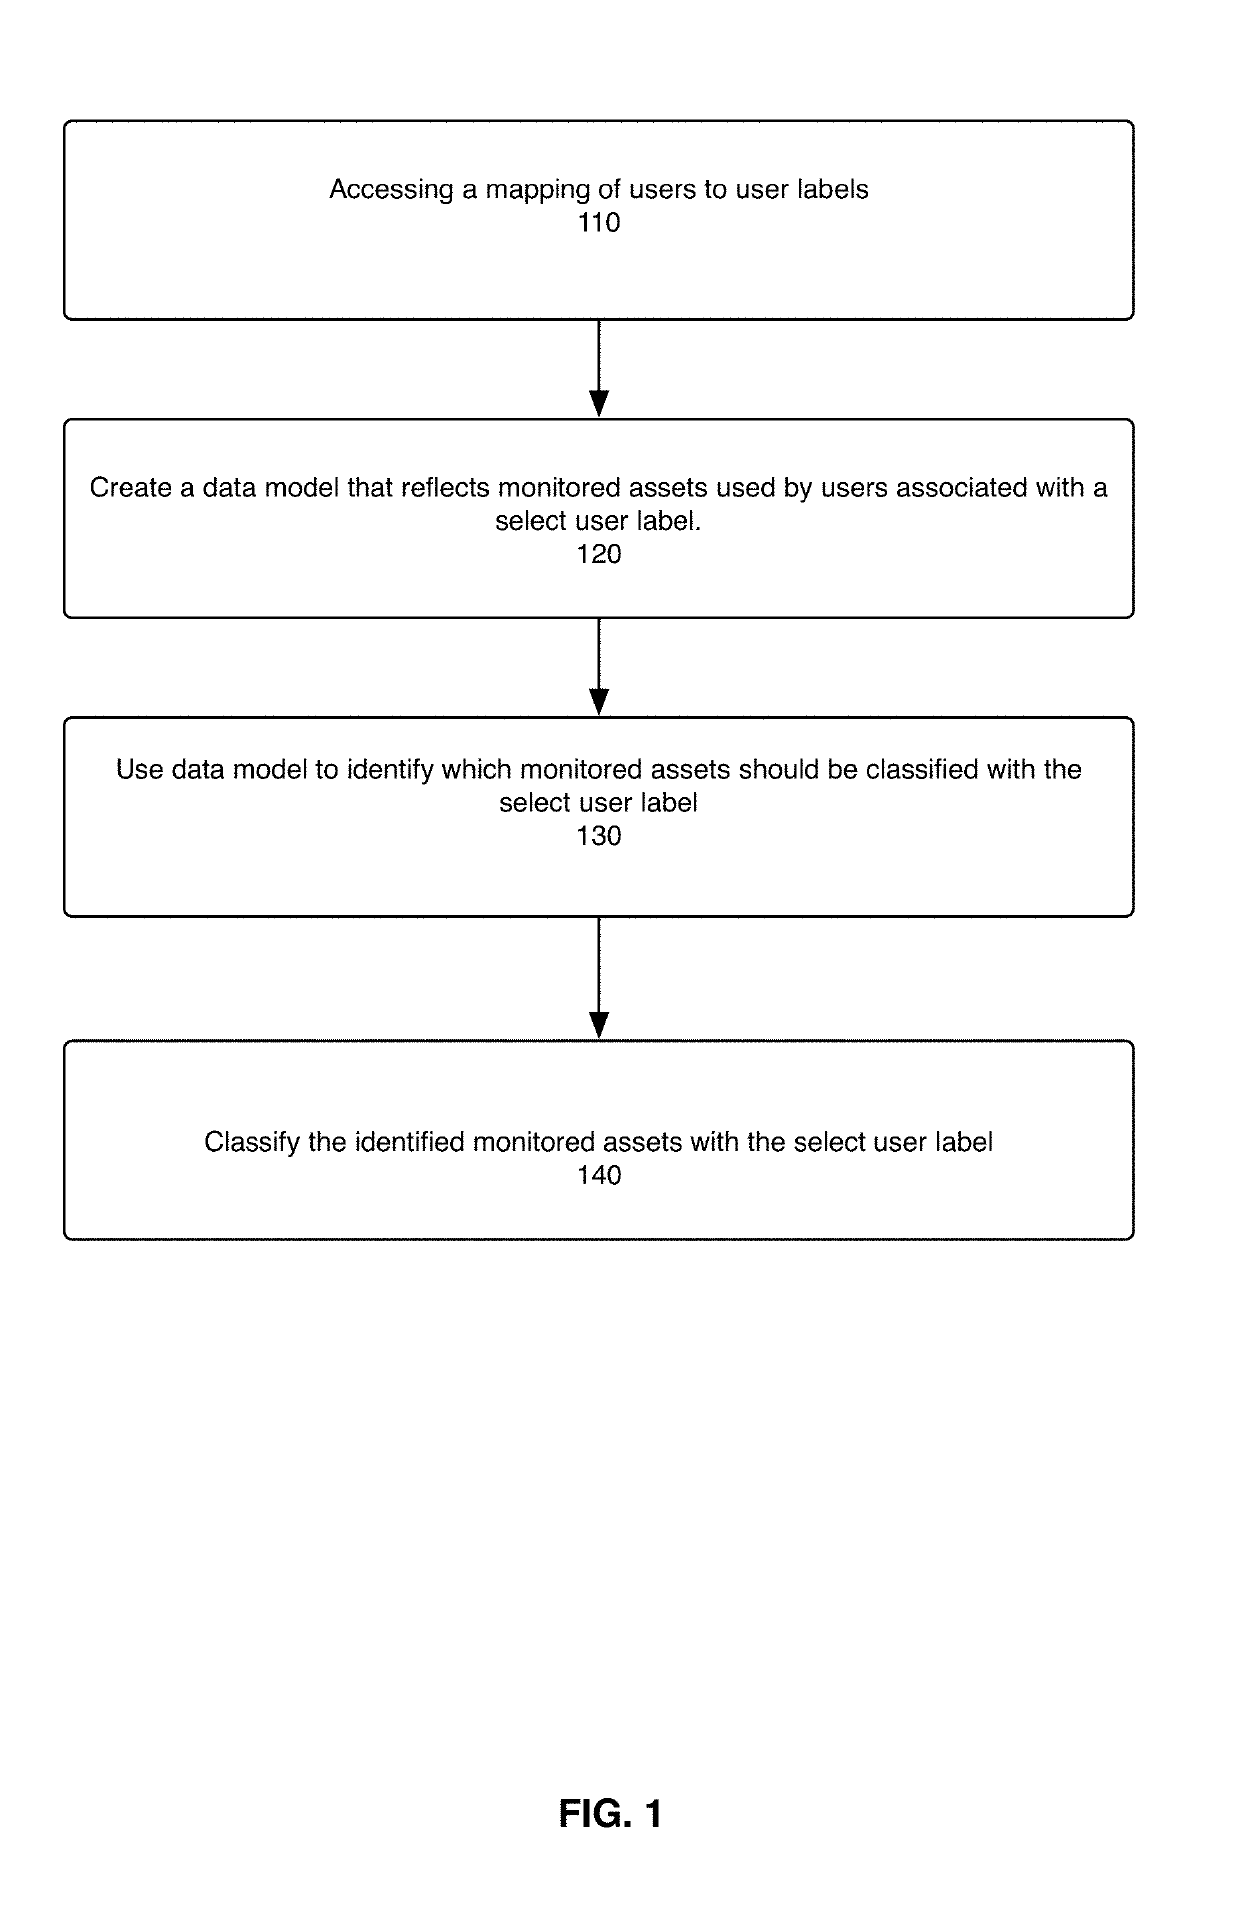 System, method, and computer program for classifying monitored assets based on user labels and for detecting potential misuse of monitored assets based on the classifications